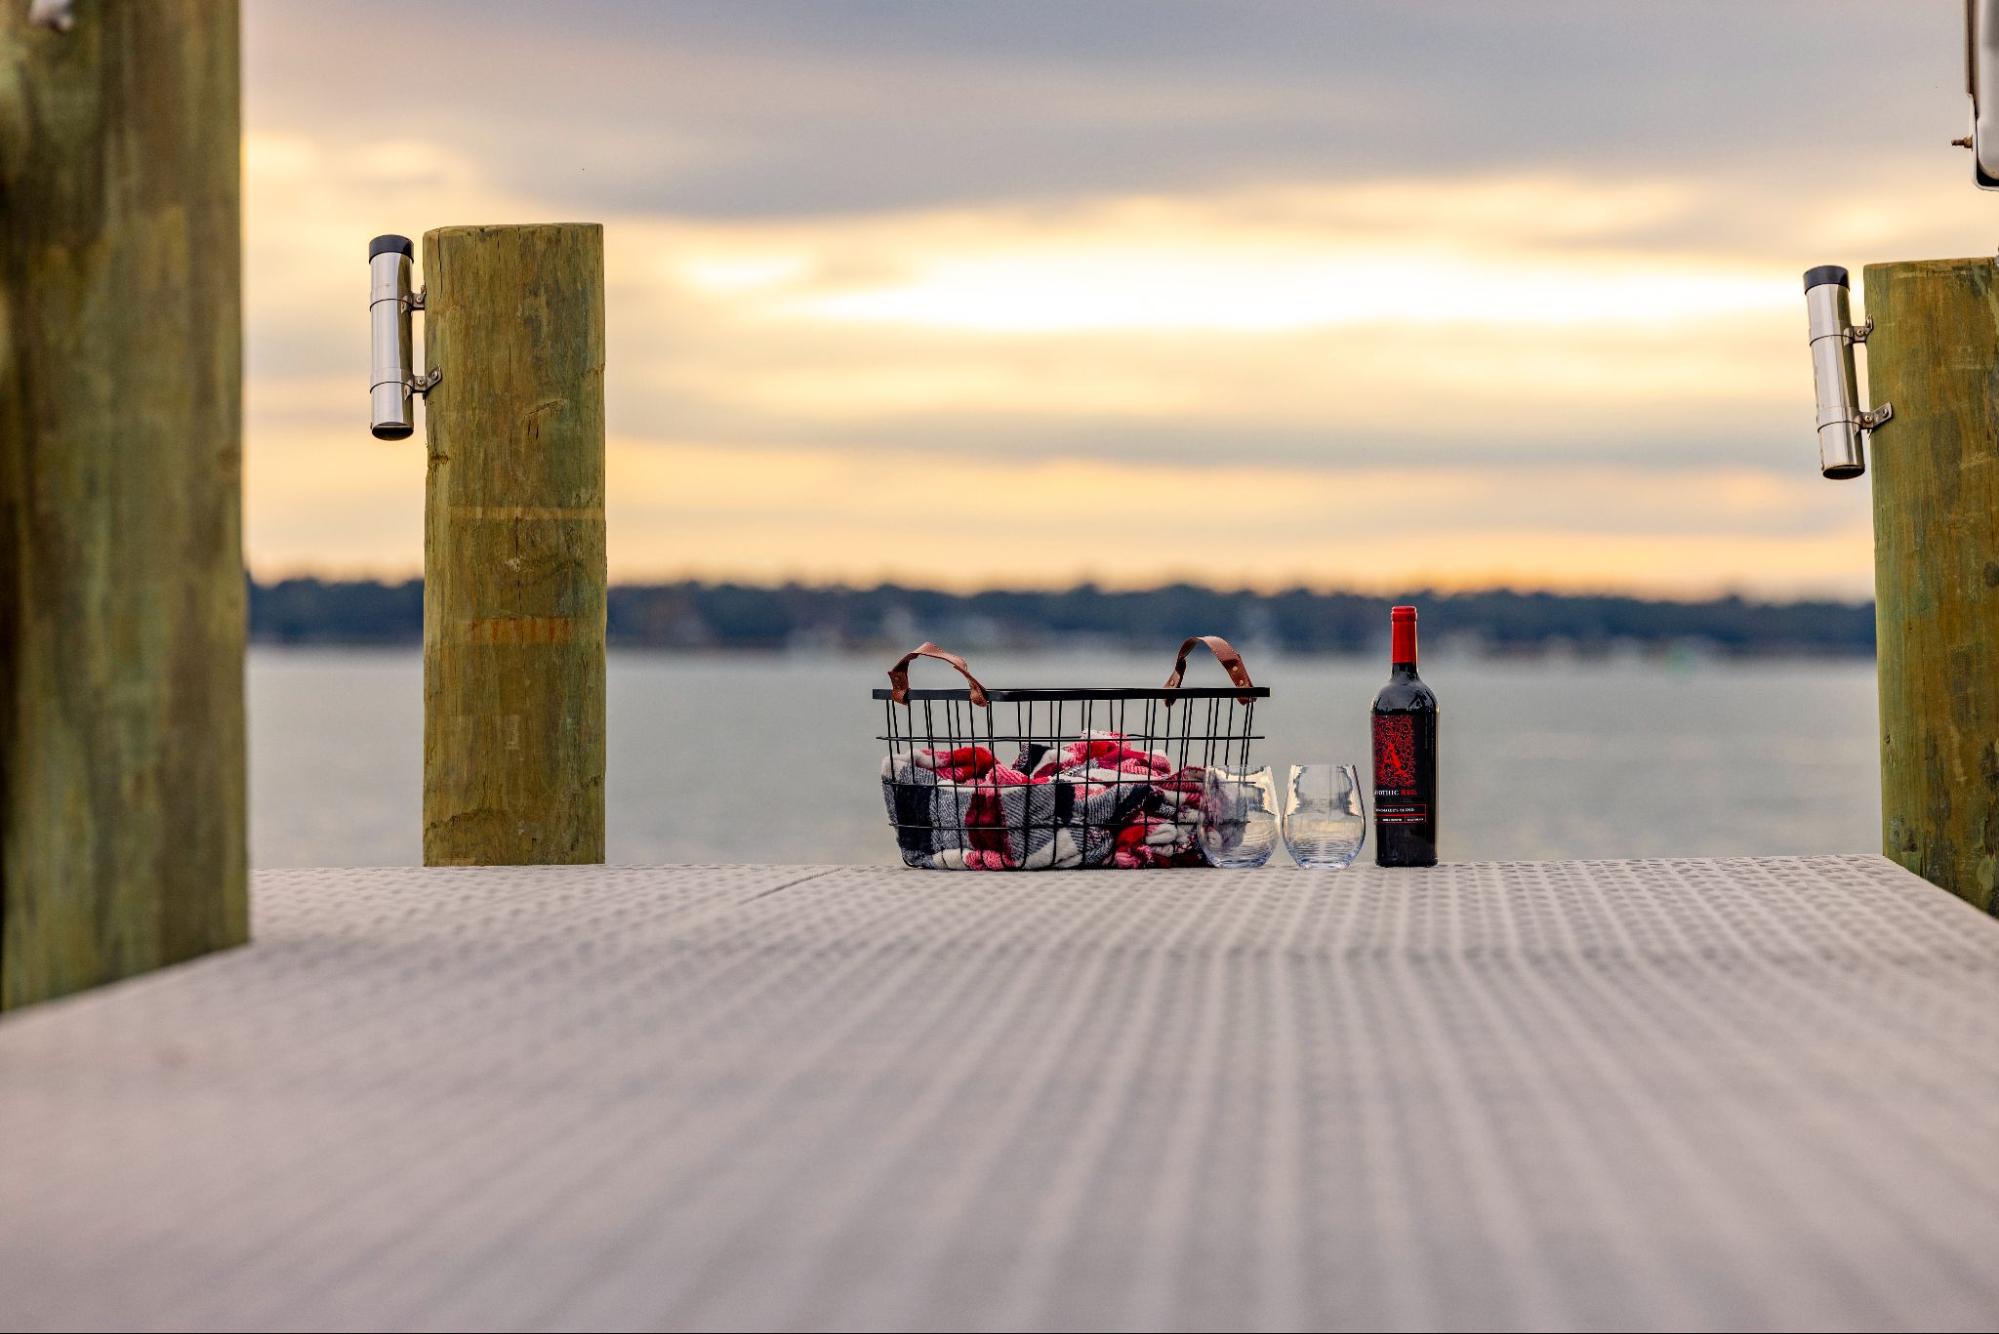 The photo depicts a low-angle close-up shot of a picnic basket with a bottle of wine and two glasses at the end of a dock. The dock is gray and there are three wooden pillars attached, two with fishing rod holders. 